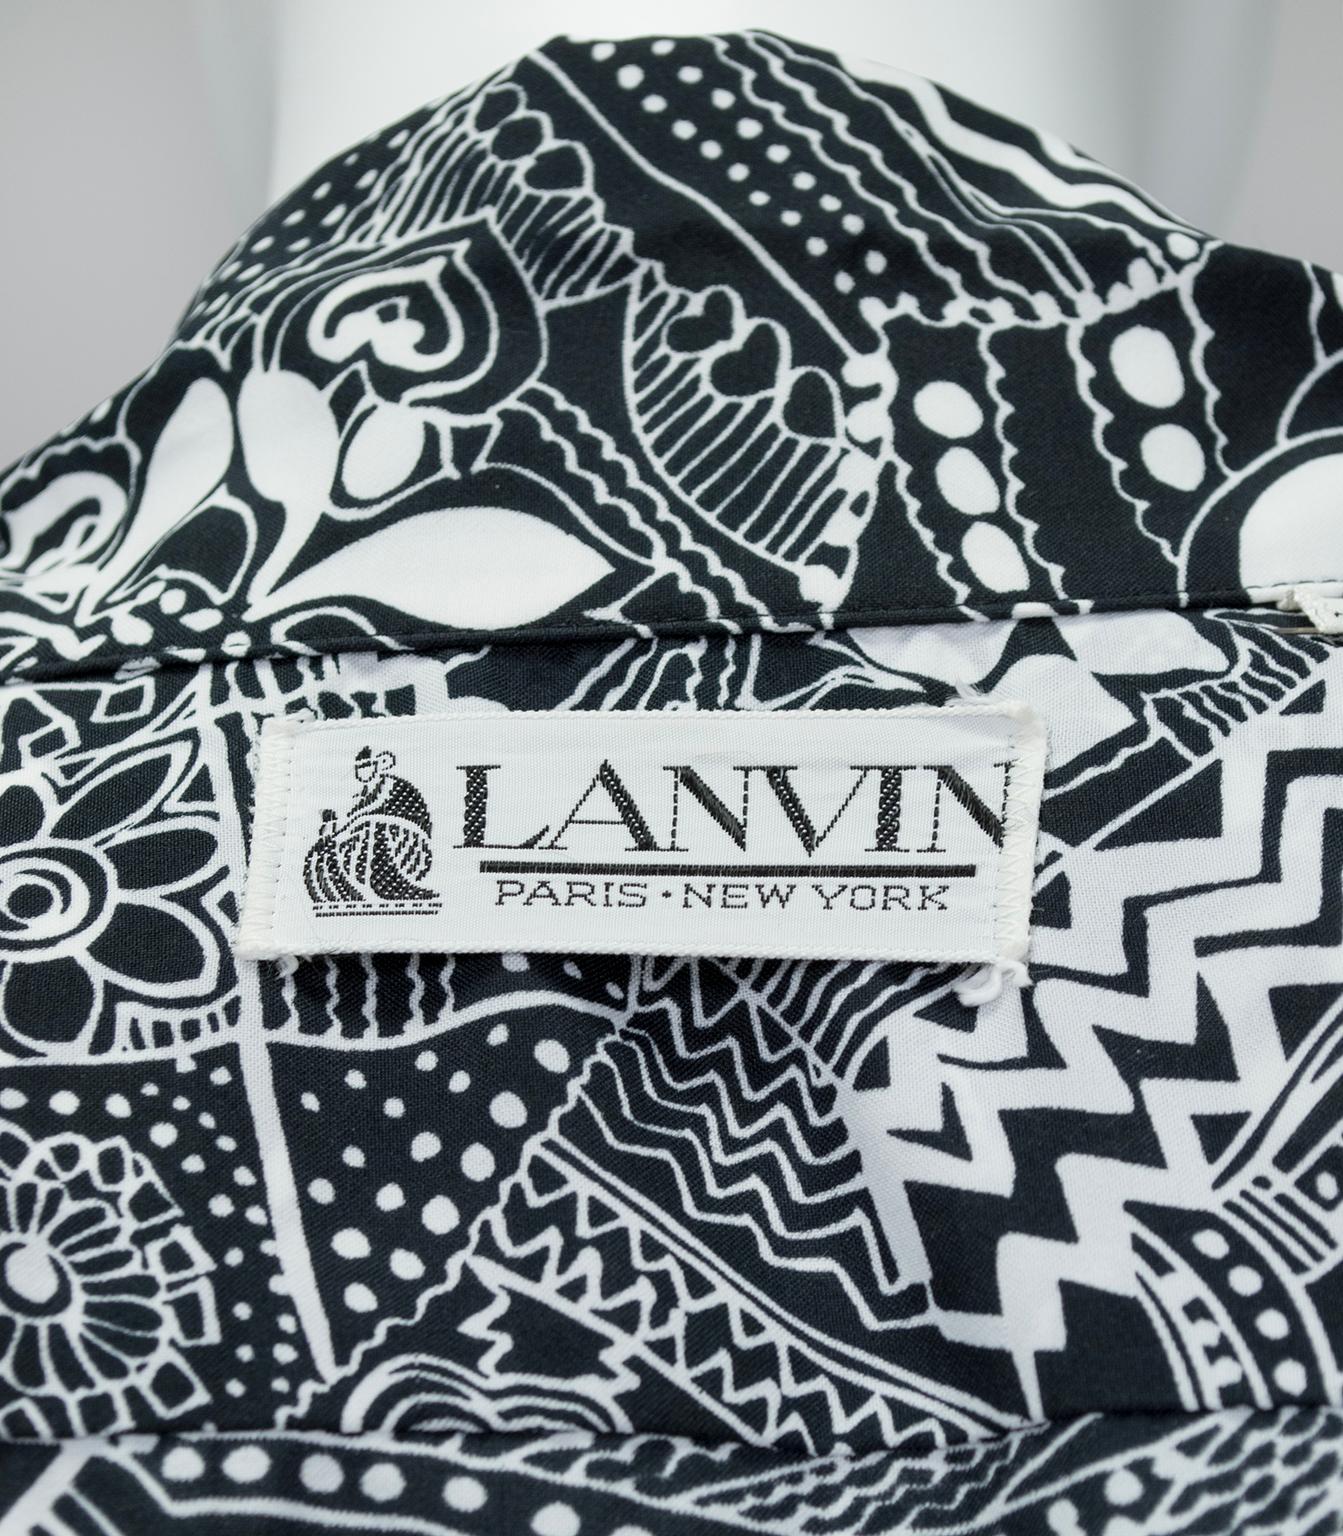 Lanvin Black and White Pop Art Belted Shirtwaist Dress - M-L, 1970s In Excellent Condition For Sale In Tucson, AZ